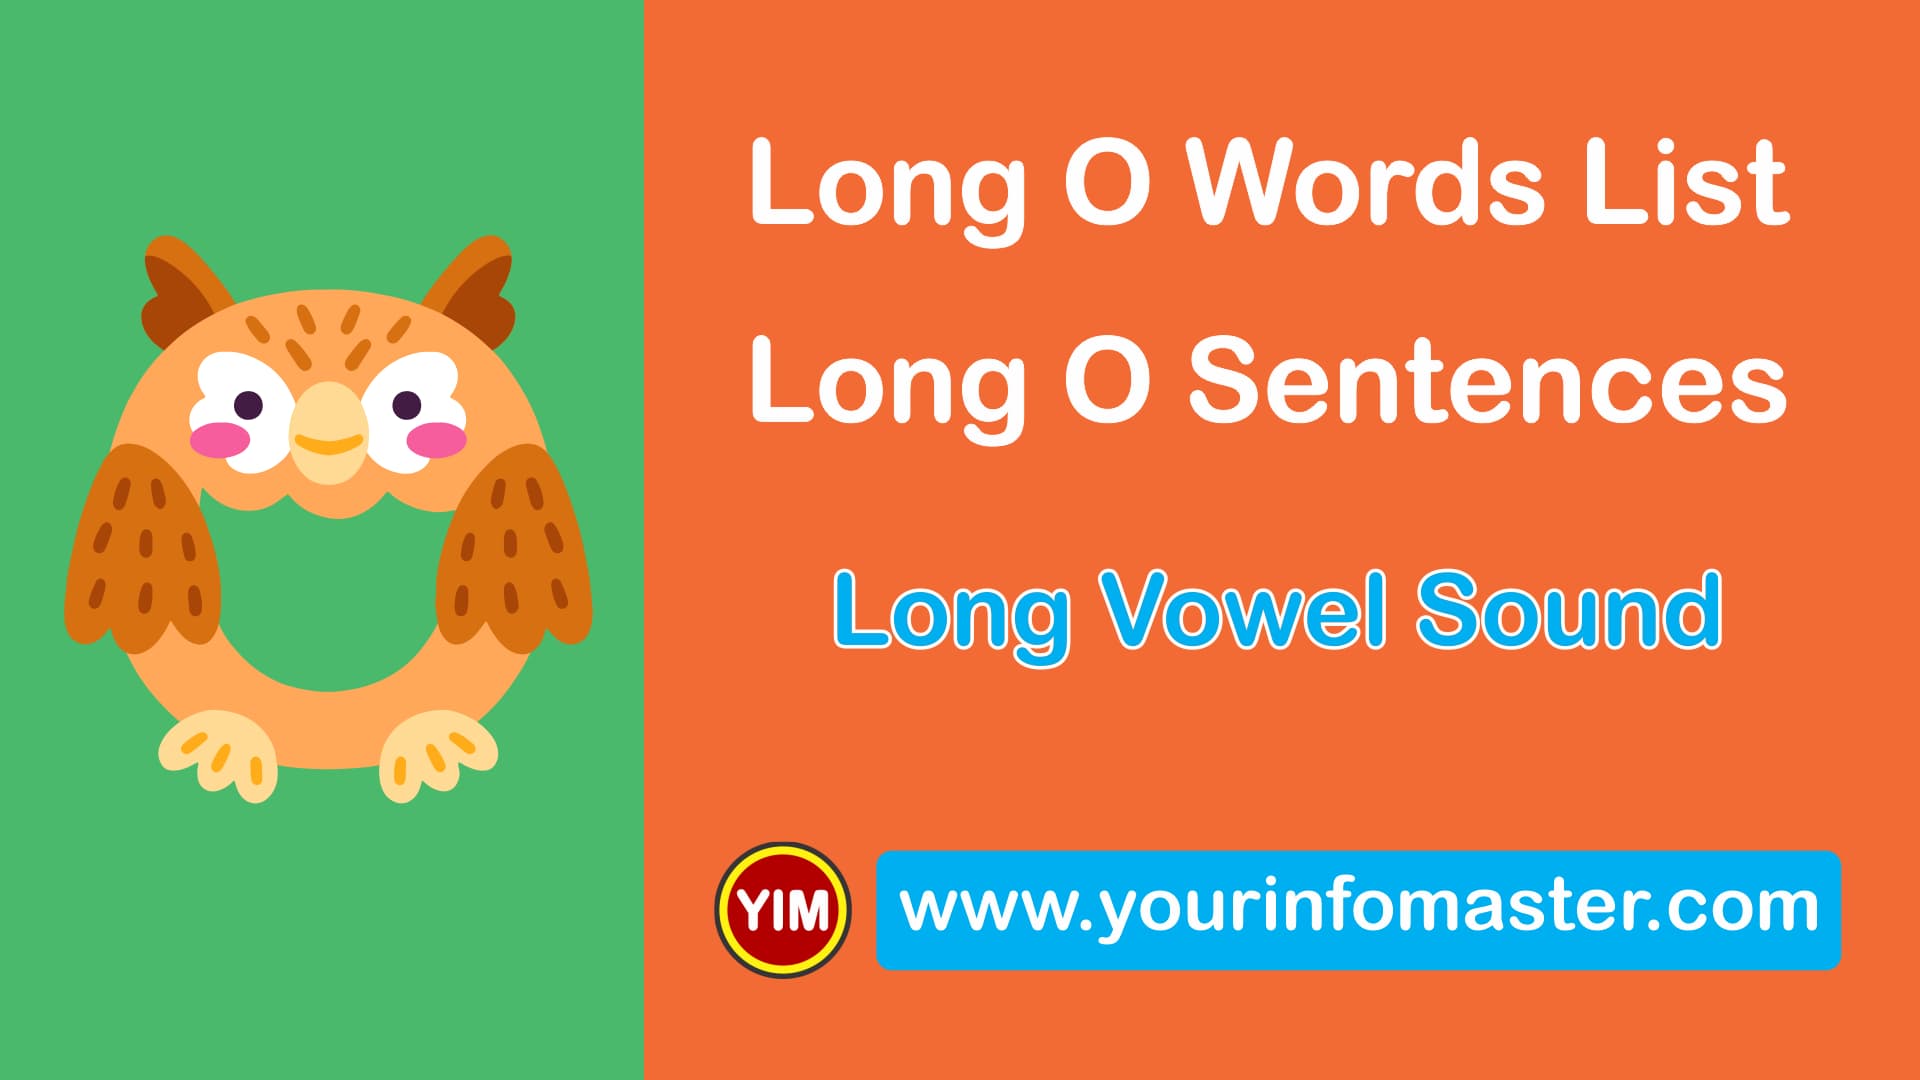 awesome words, cool long words, cool words, Learning Spellings, Long O sound words, Long O words, Long O Words List, Long O Words Worksheets, Long versus Short Vowels, Long Vowel, Long Vowel Examples, Long Vowel Sound, Long Vowel Sounds Examples, o words, Using Long Vowel Sounds, Vowel O Sound, Vowel Pronunciation, What is a Vowel, word of the day for kids